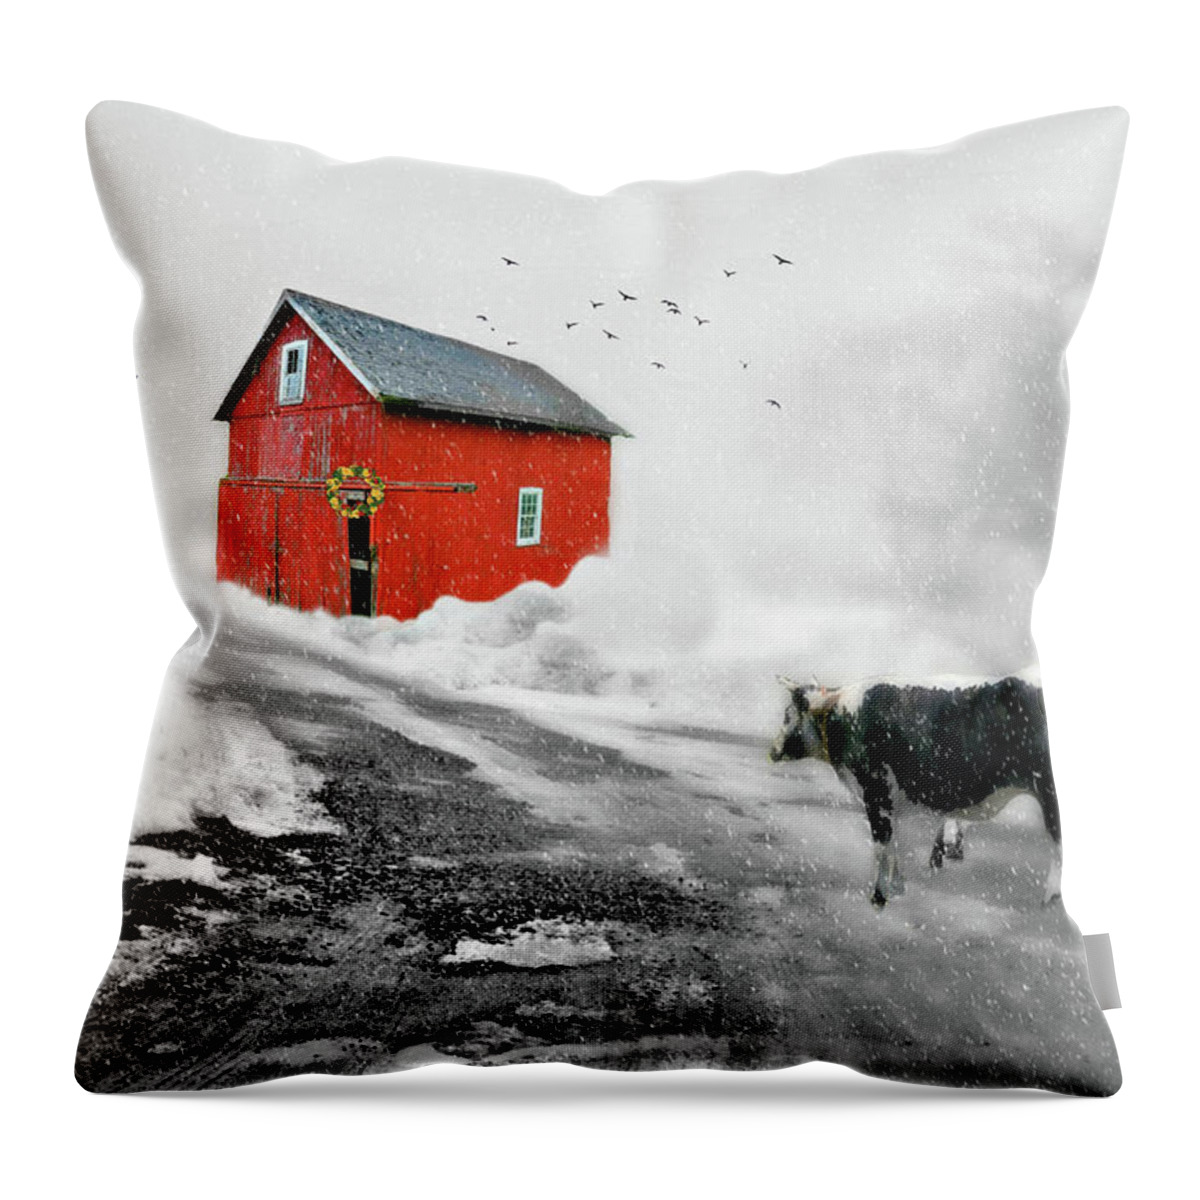 Connecticut Landscape Throw Pillow featuring the photograph The Red Red Barn by Diana Angstadt